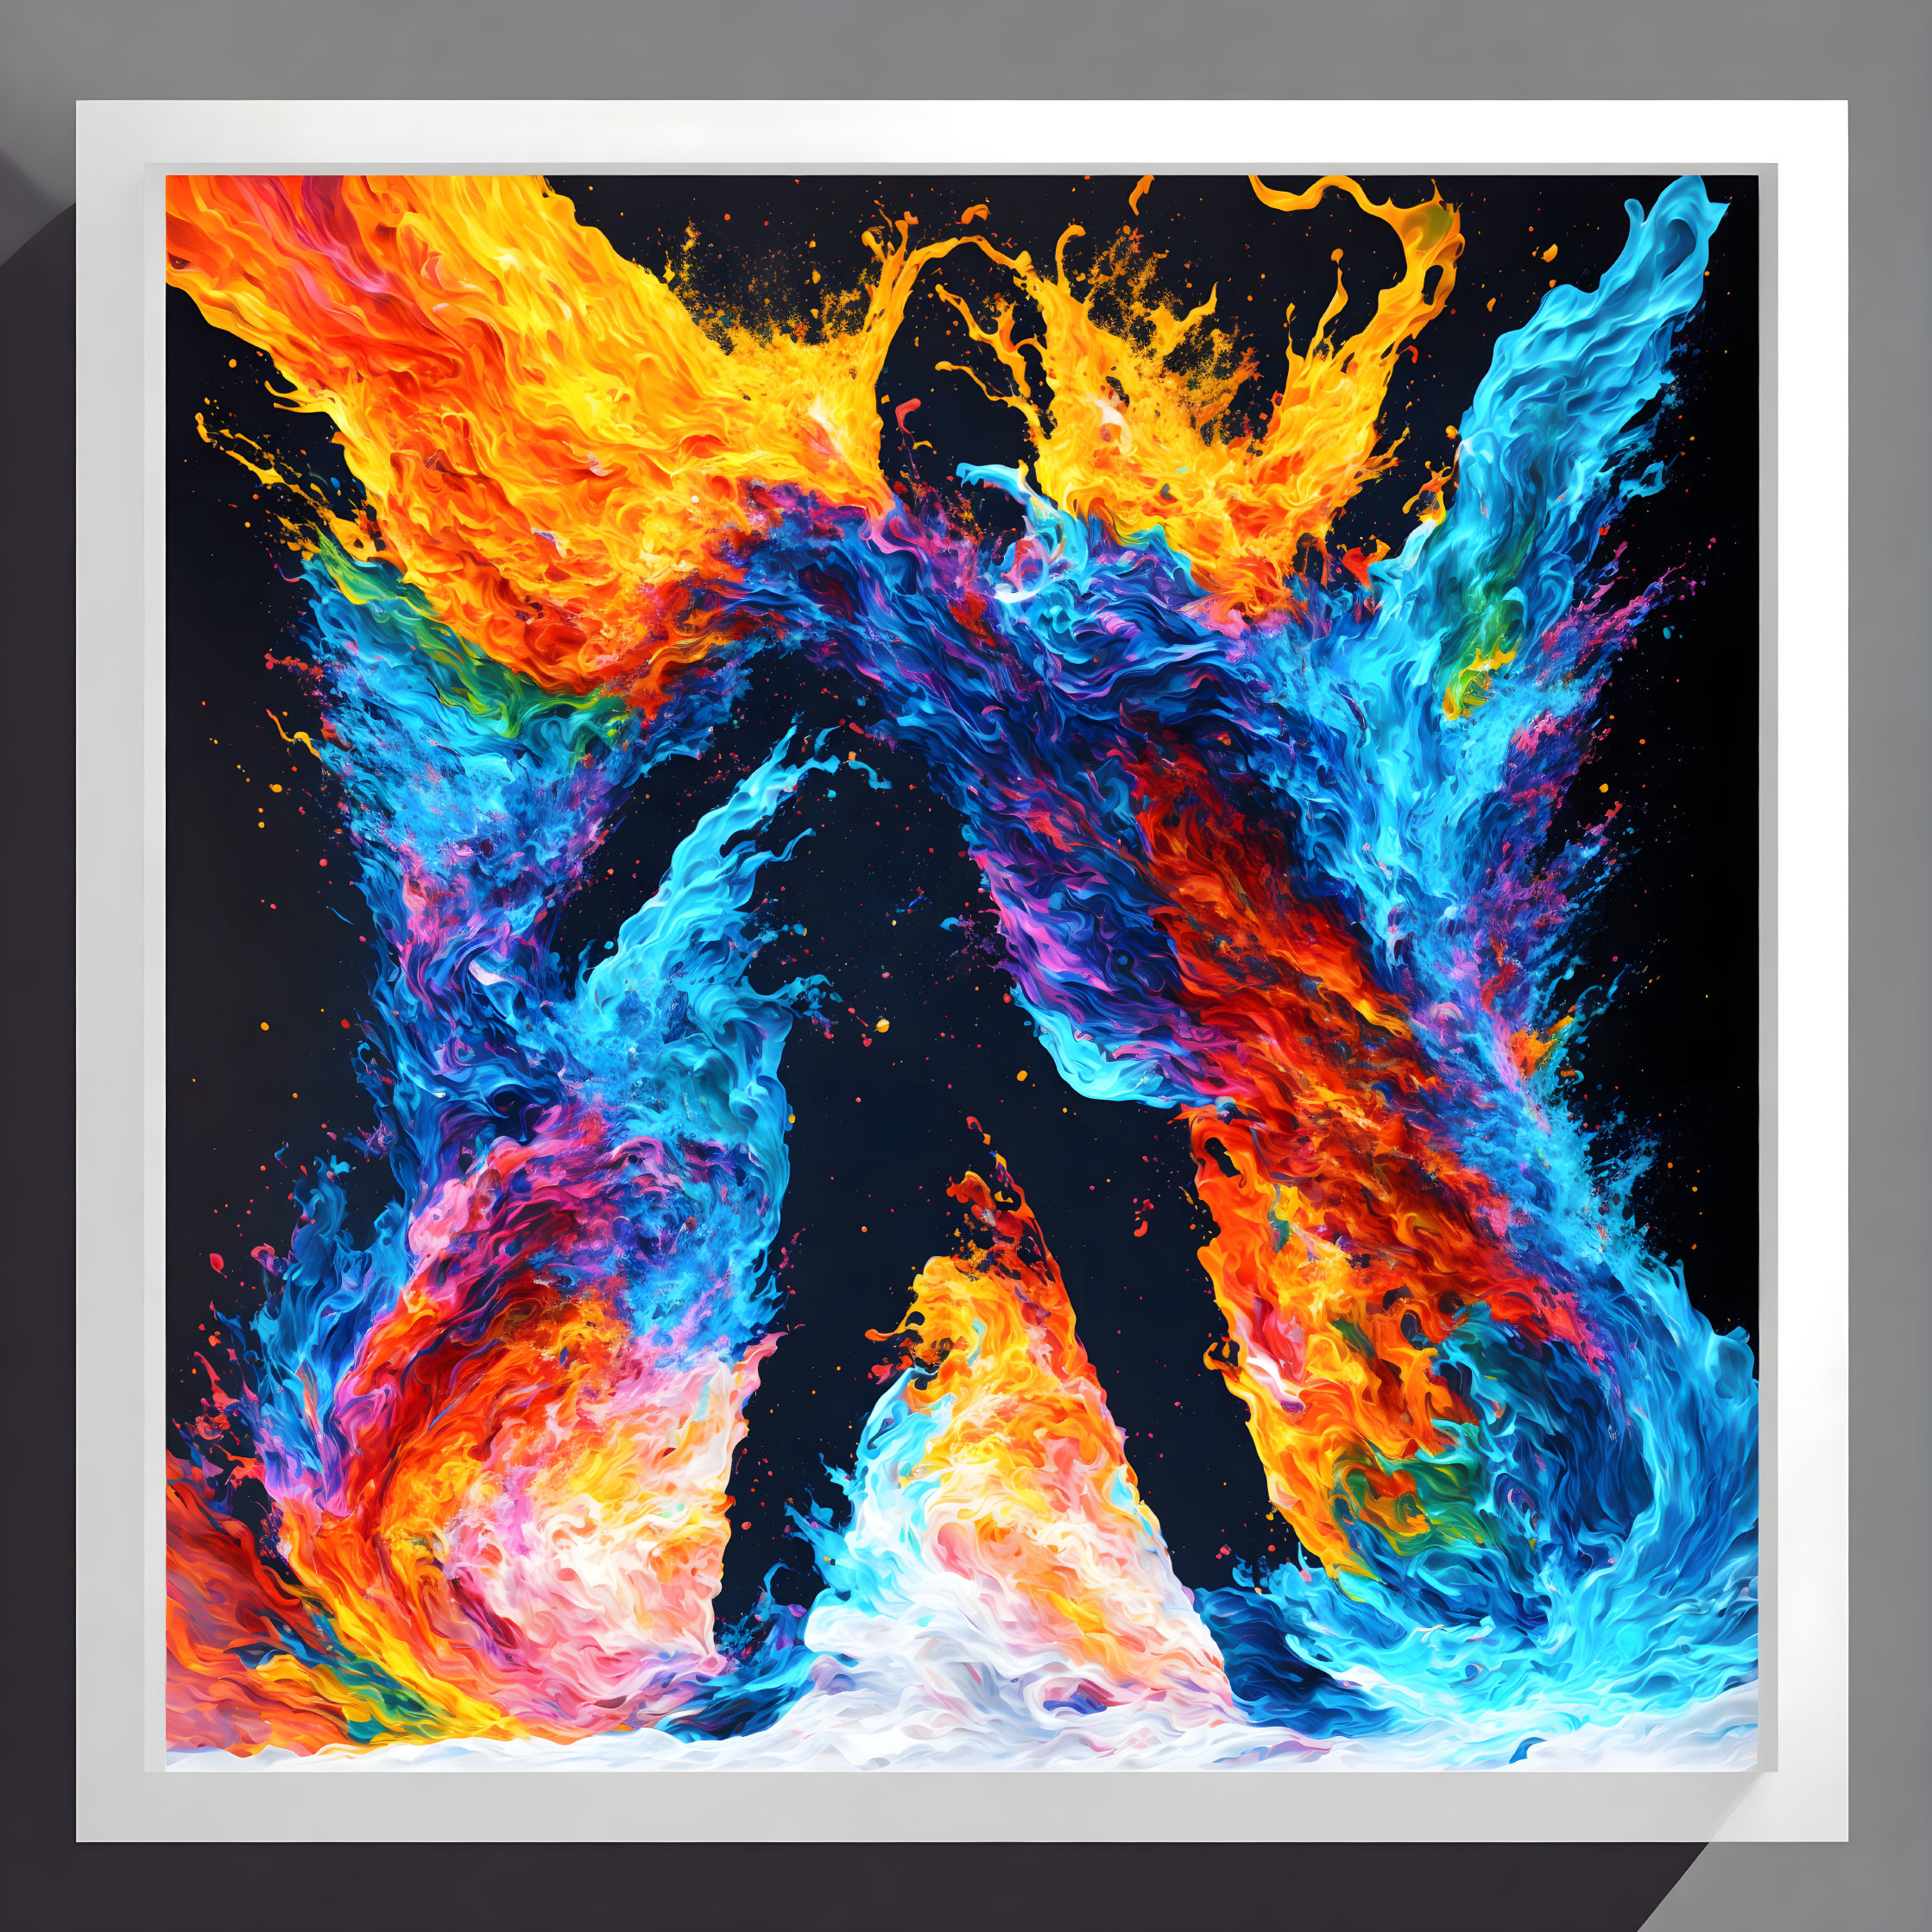 Abstract painting: Swirling flames in blue, orange, and yellow hues